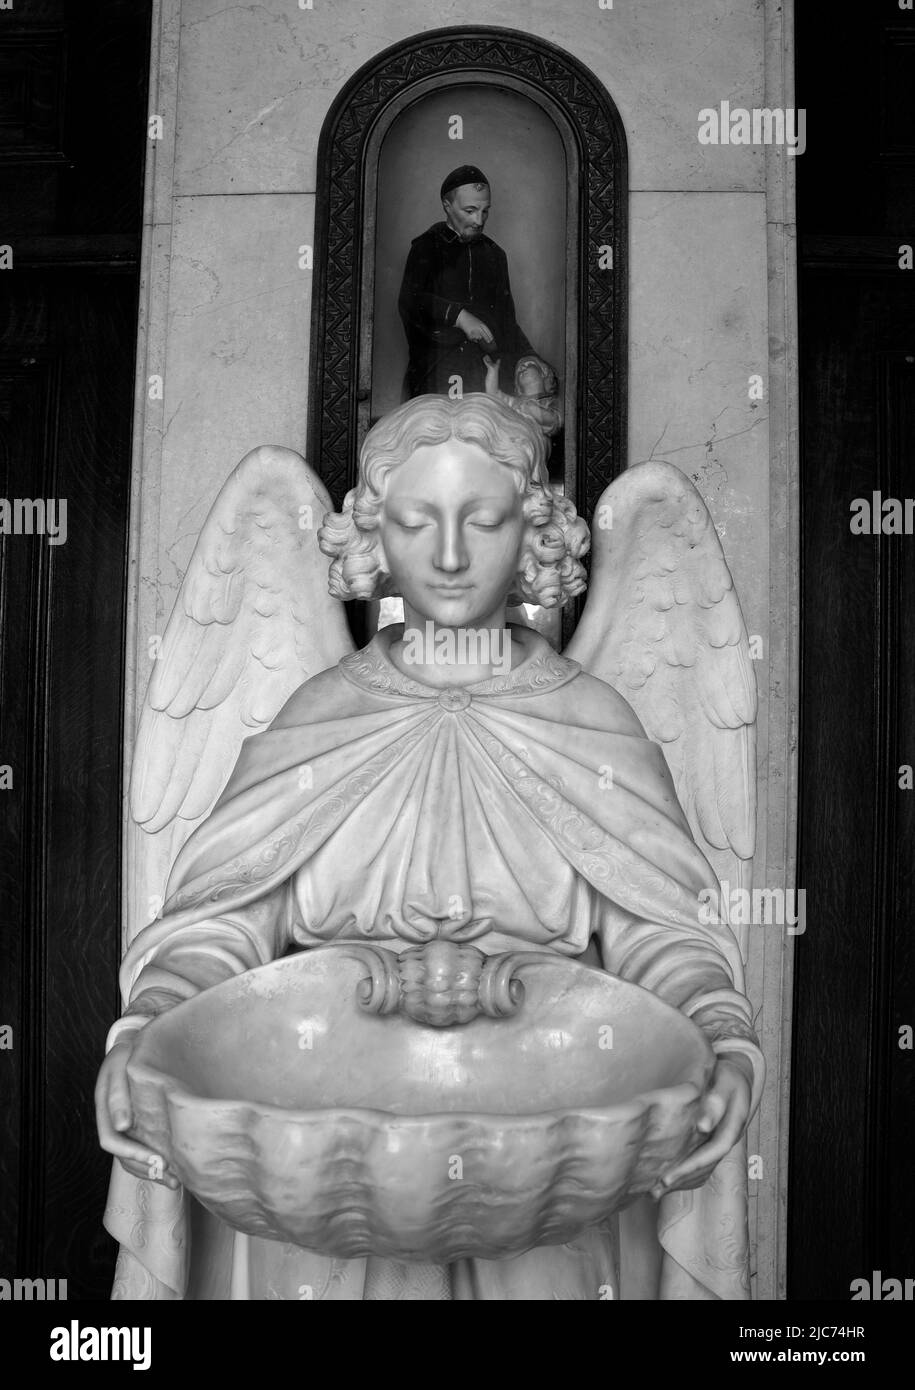 A Holy Water font in the form of an angel in Saints Peter and Paul Church in the North Beach neighborhood of San Francisco, California. Stock Photo